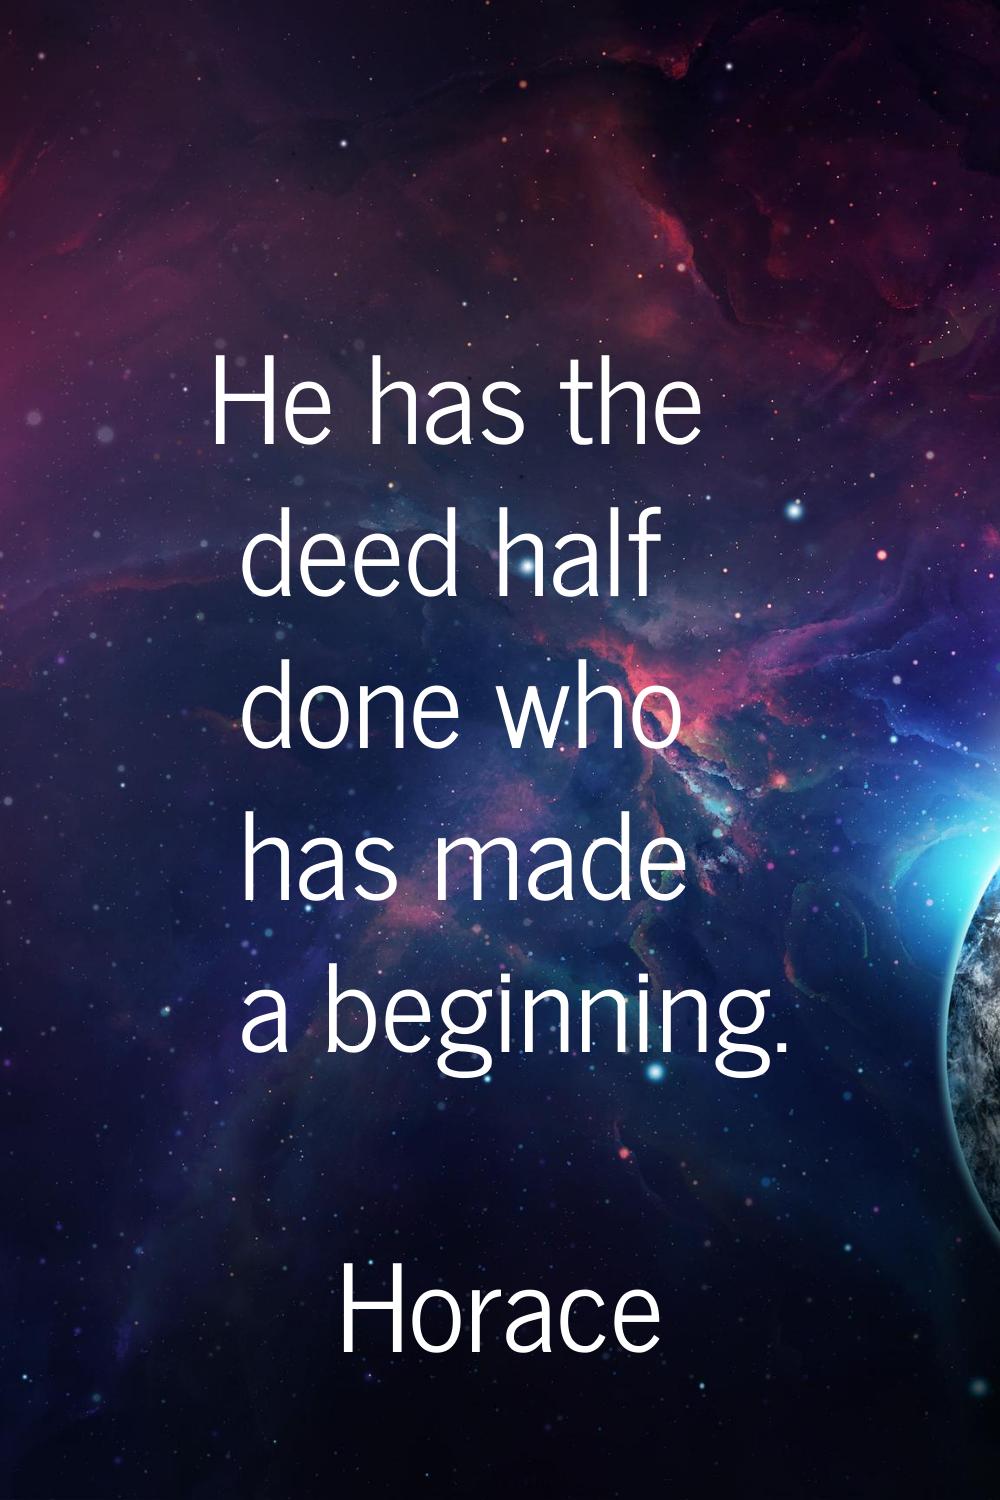 He has the deed half done who has made a beginning.